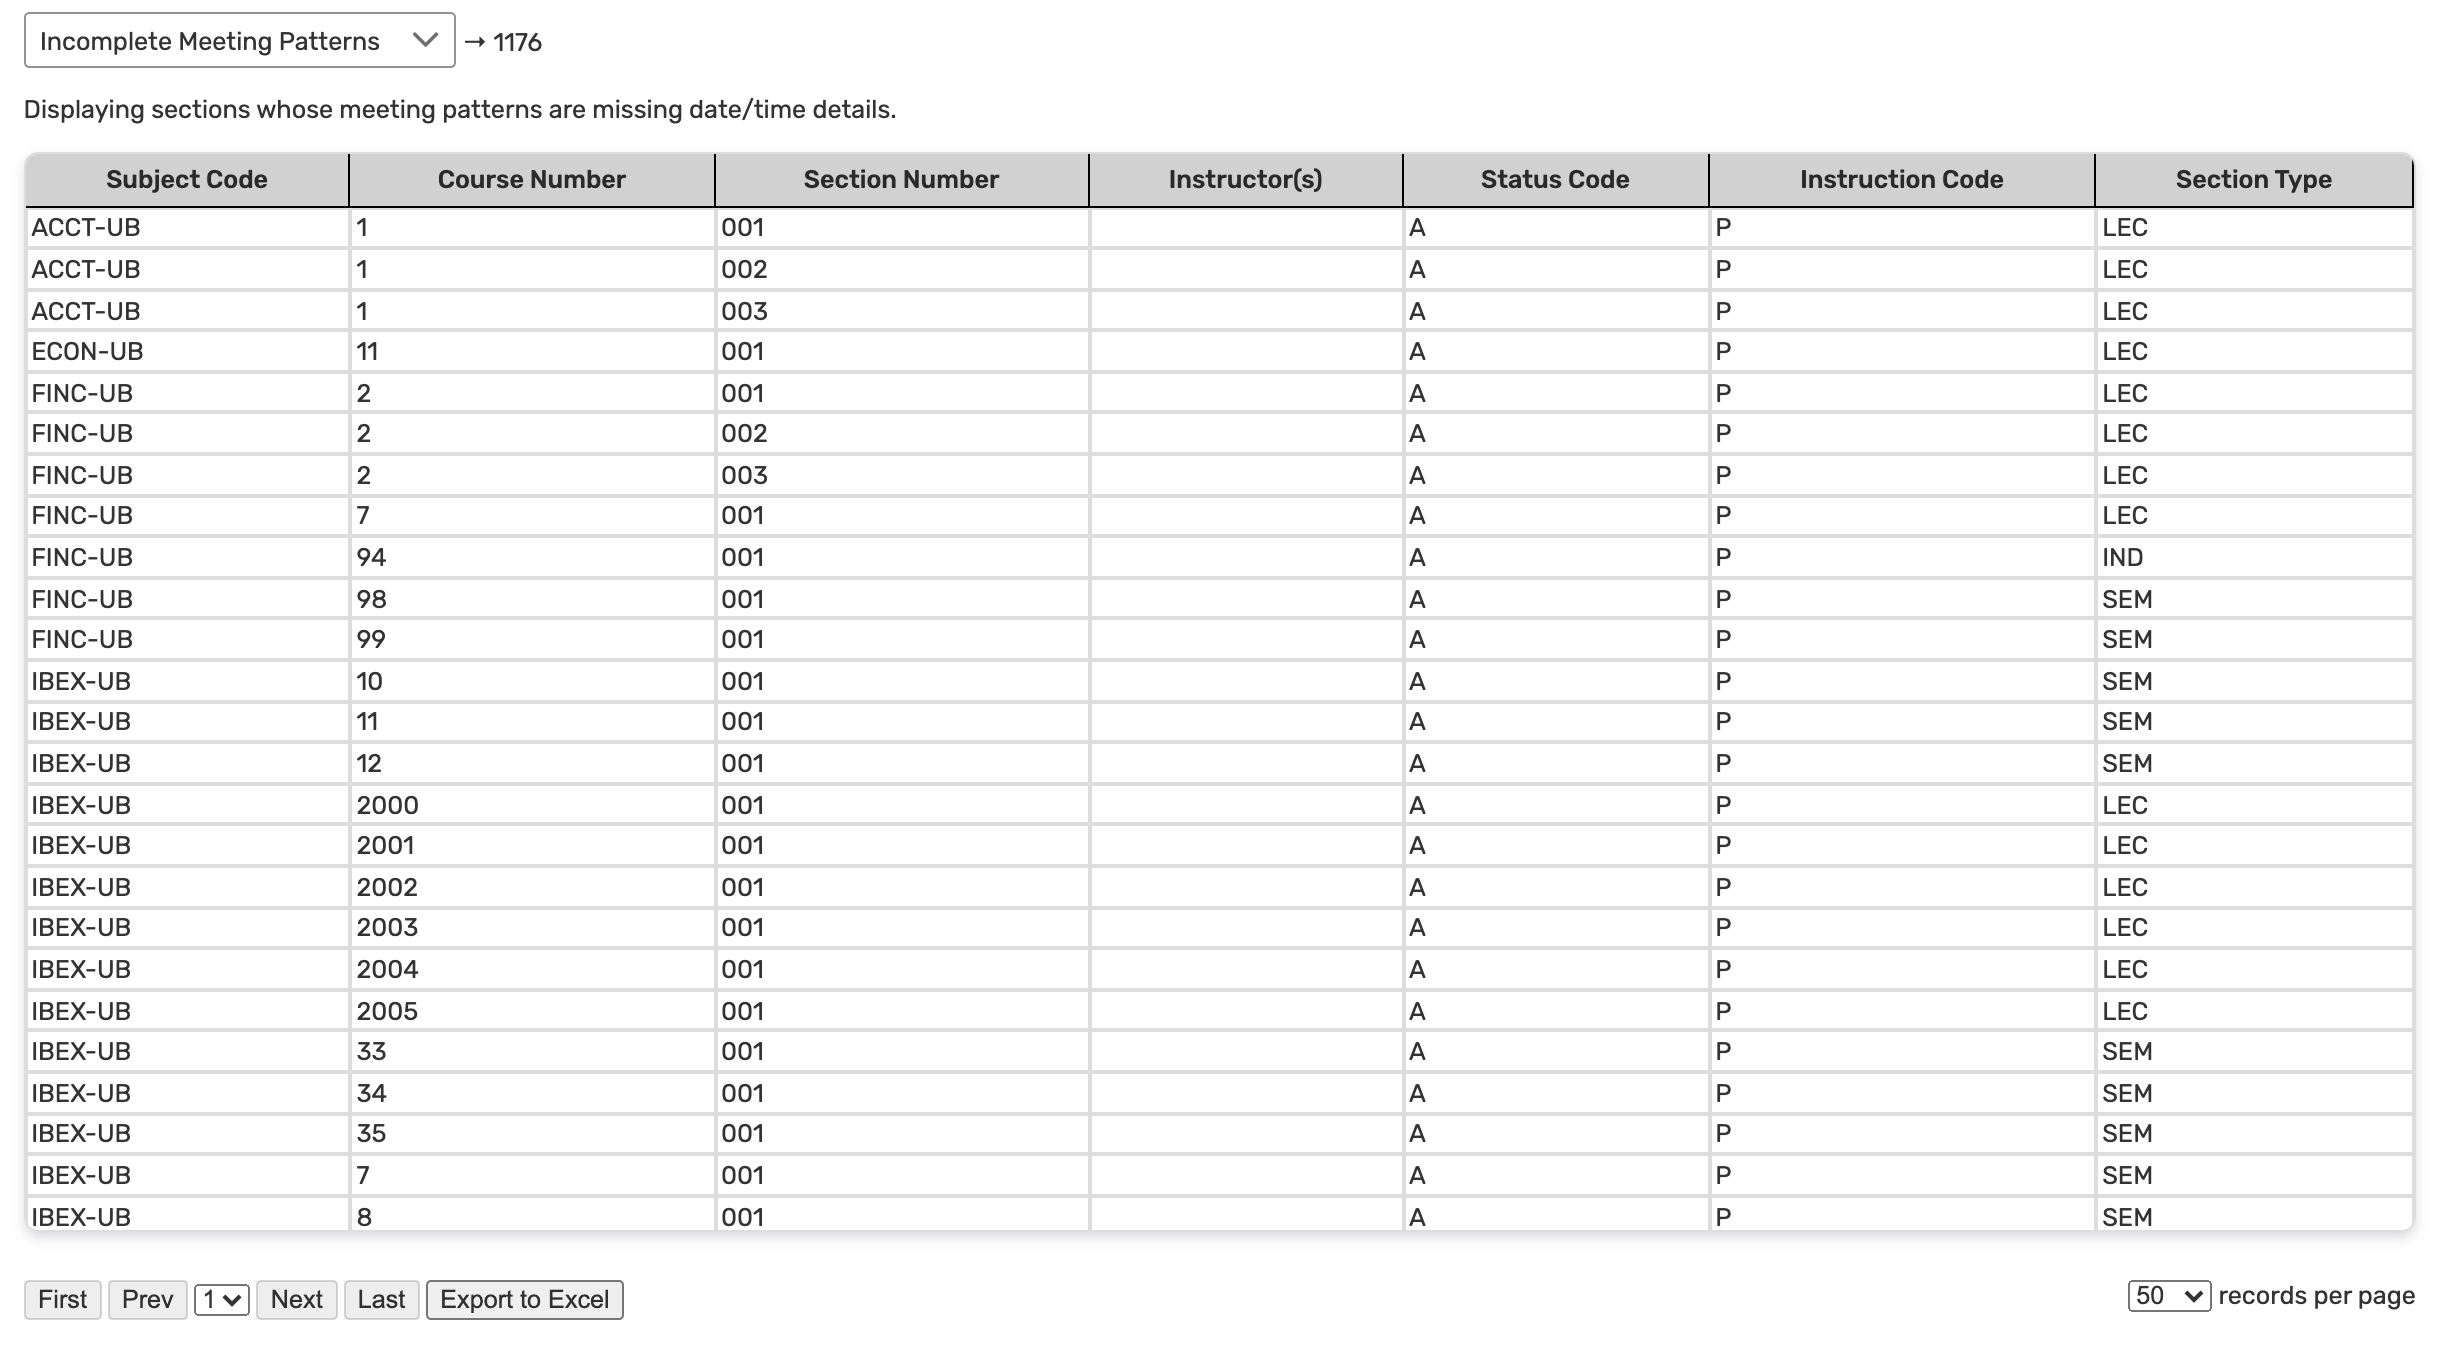 Table of sections without meeting pattern information